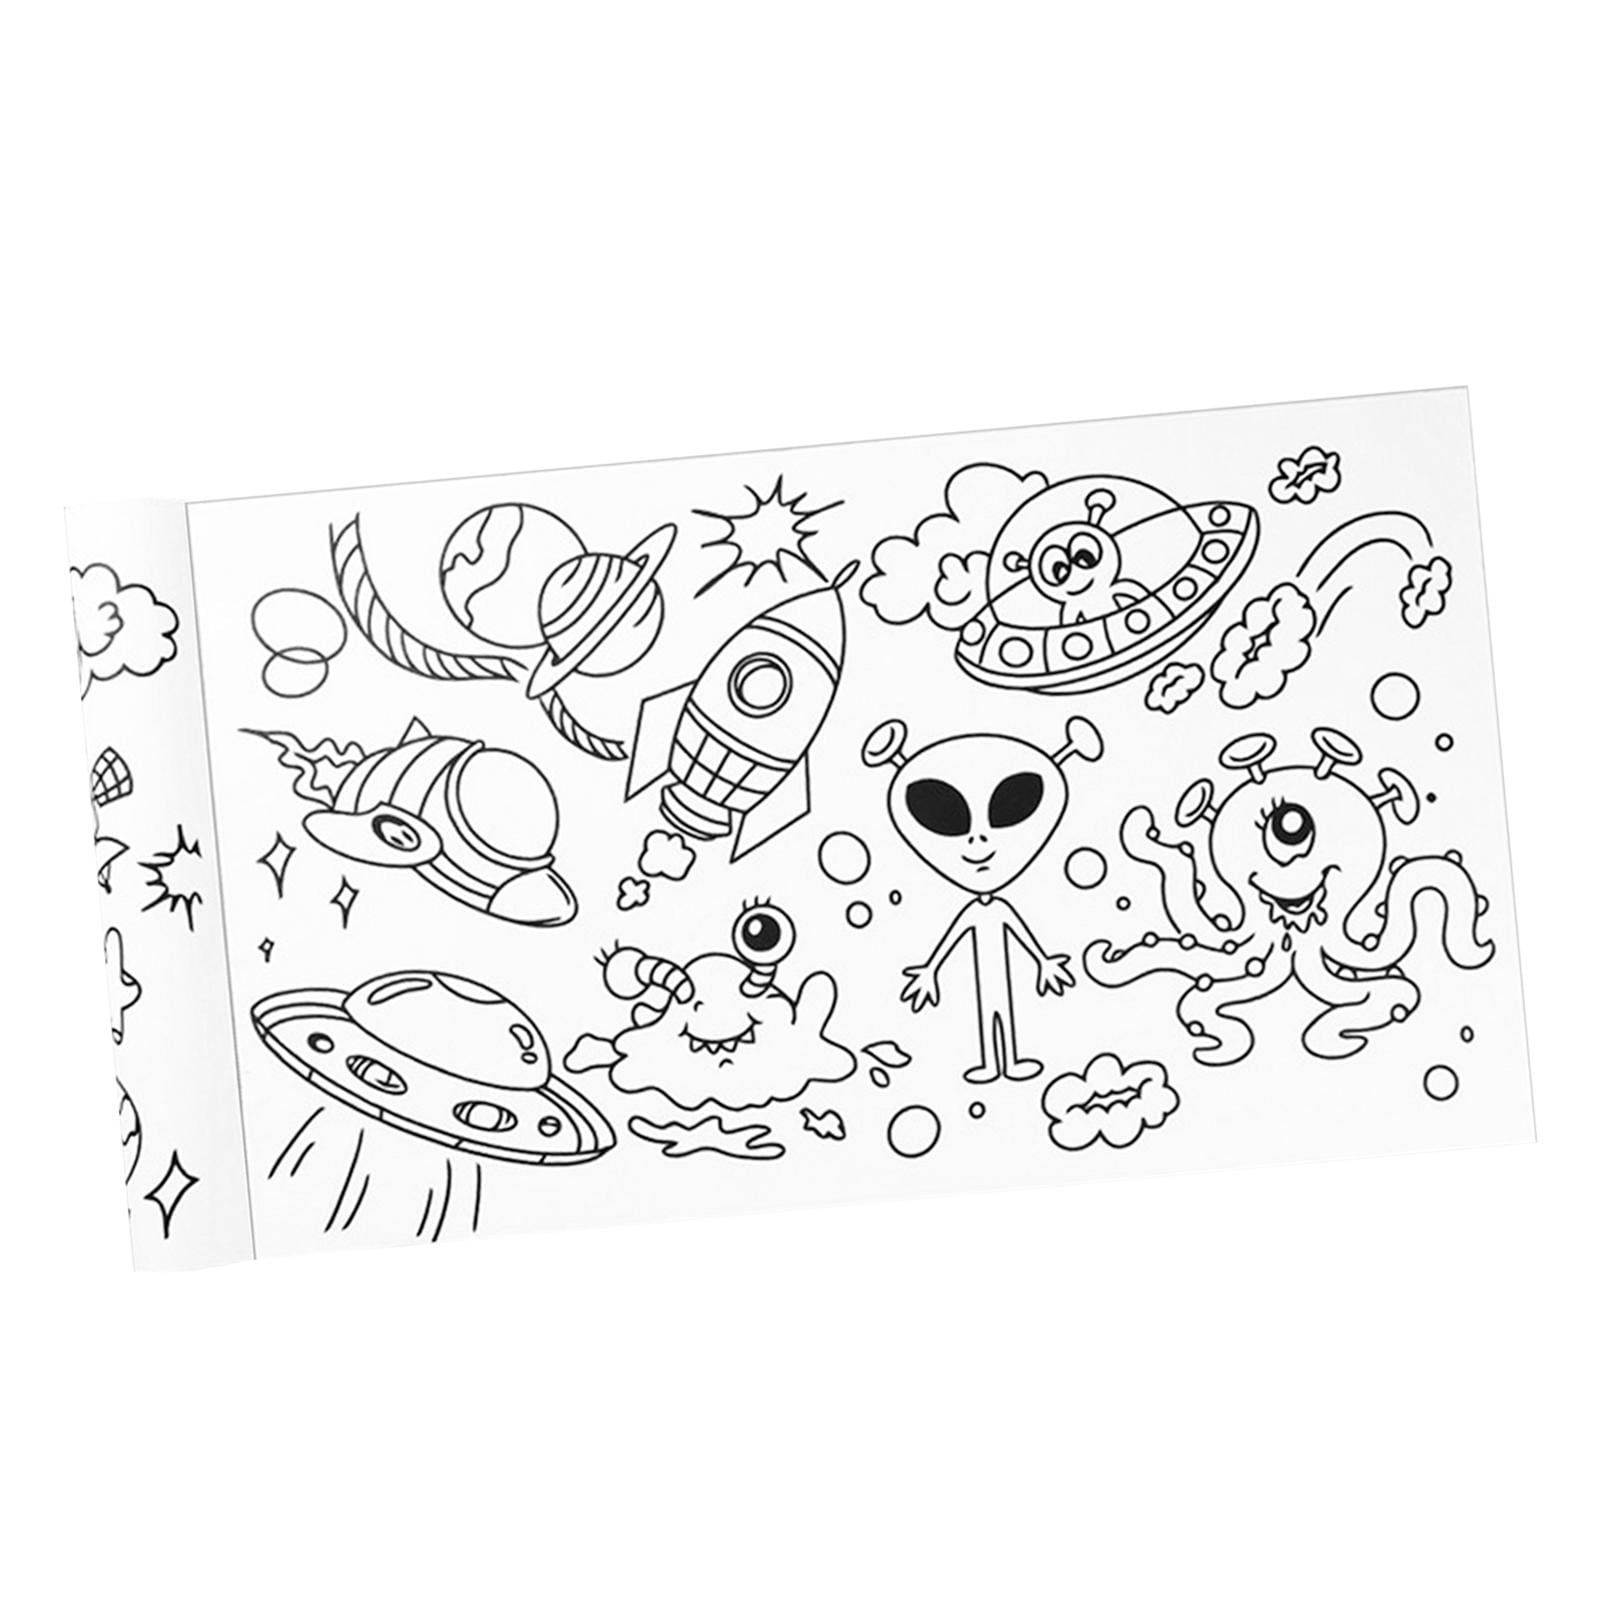  TEHAUX 2 Rolls Roll Graffiti Tracing Paper Art Paper for Sketch  Paper for Drawing Paper Drawing for Kids Coloring Painting Decal Space  Coloring Poster Toddler Picture Confetti : Toys & Games